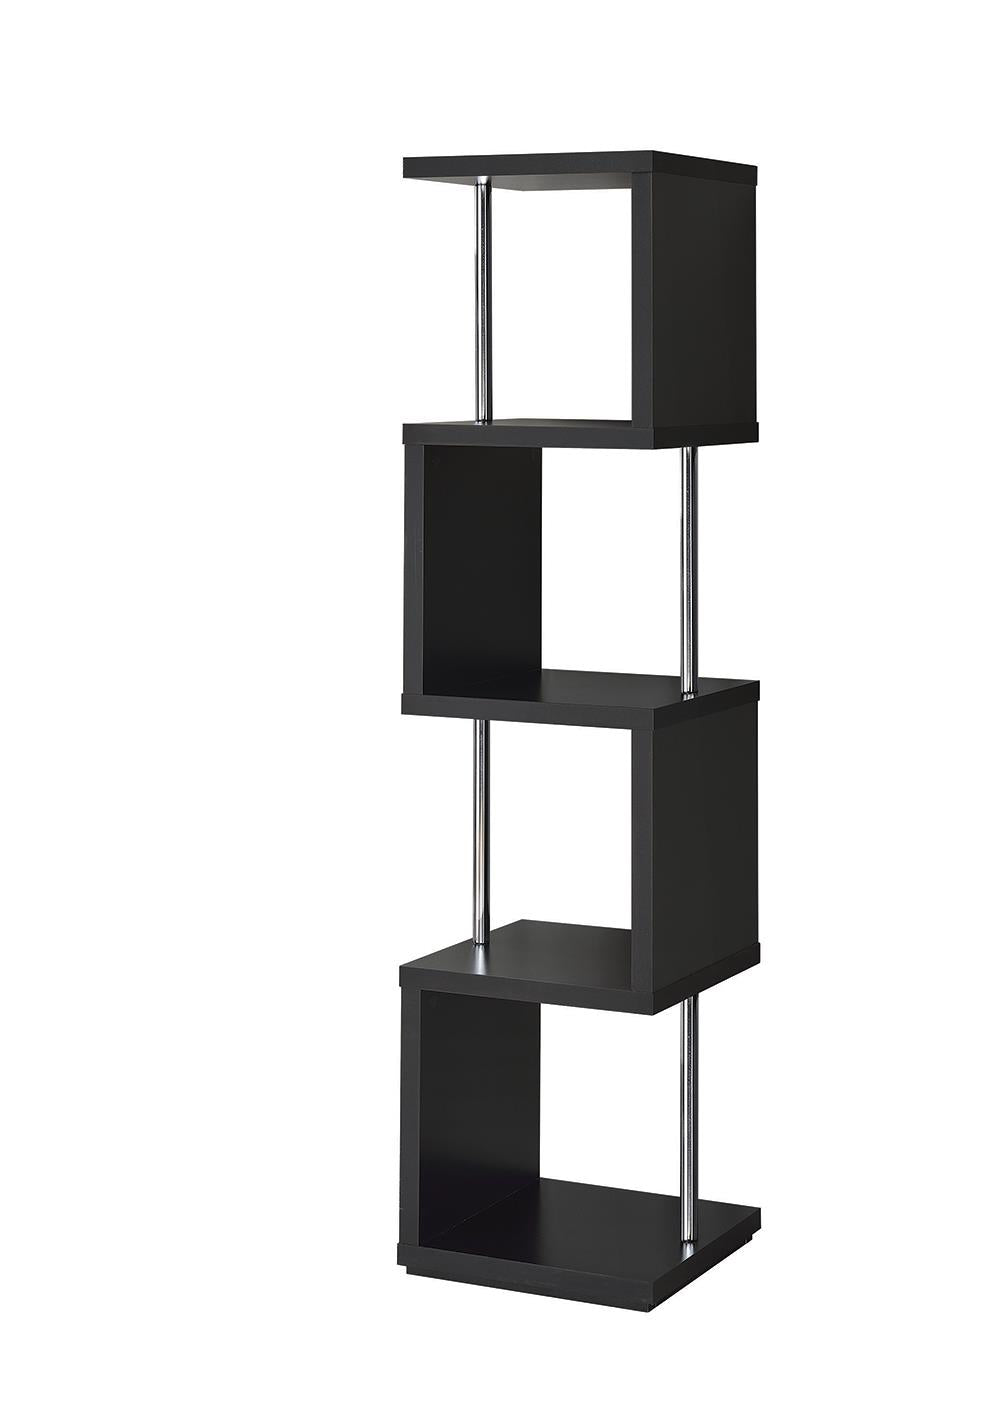 4-shelf Bookcase Black and Chrome - What A Room